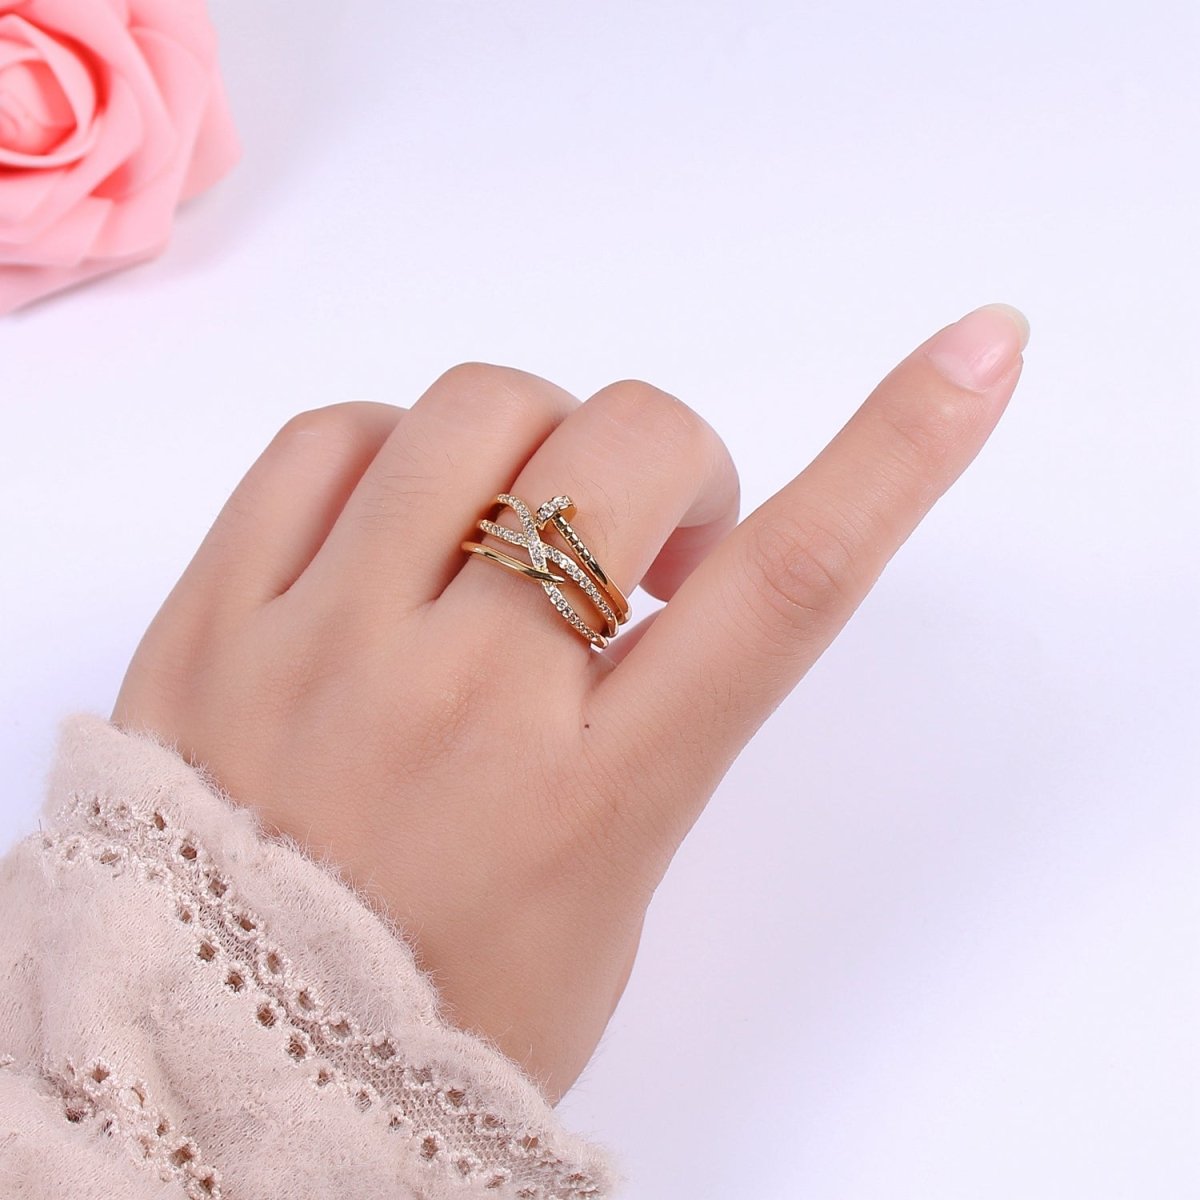 Nail ring Gold Cross Over Nail wrap ring CZ Gold ring Spiral nail ring Unique ring Nail jewelry Adjustable ring U-124 - DLUXCA